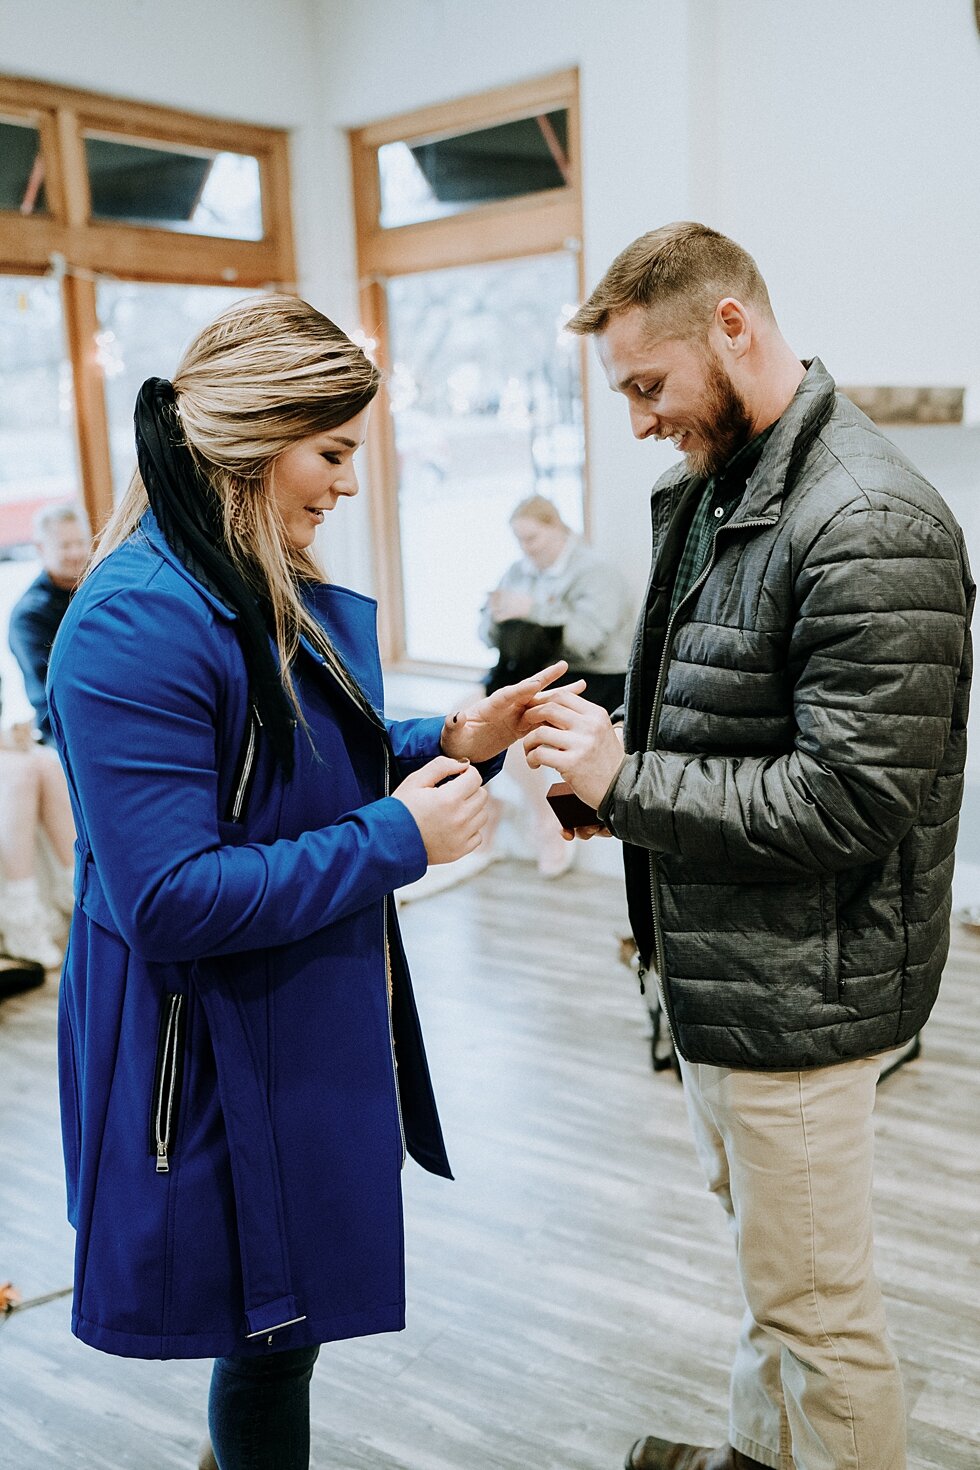  They didn’t even take their coats off, he was so excited to pop the question right as they walked in the door! #engagementgoals #proposalphotographer #engaged #photographedengagement #kentuckyphotographer #indianaphotographer #louisvillephotographer